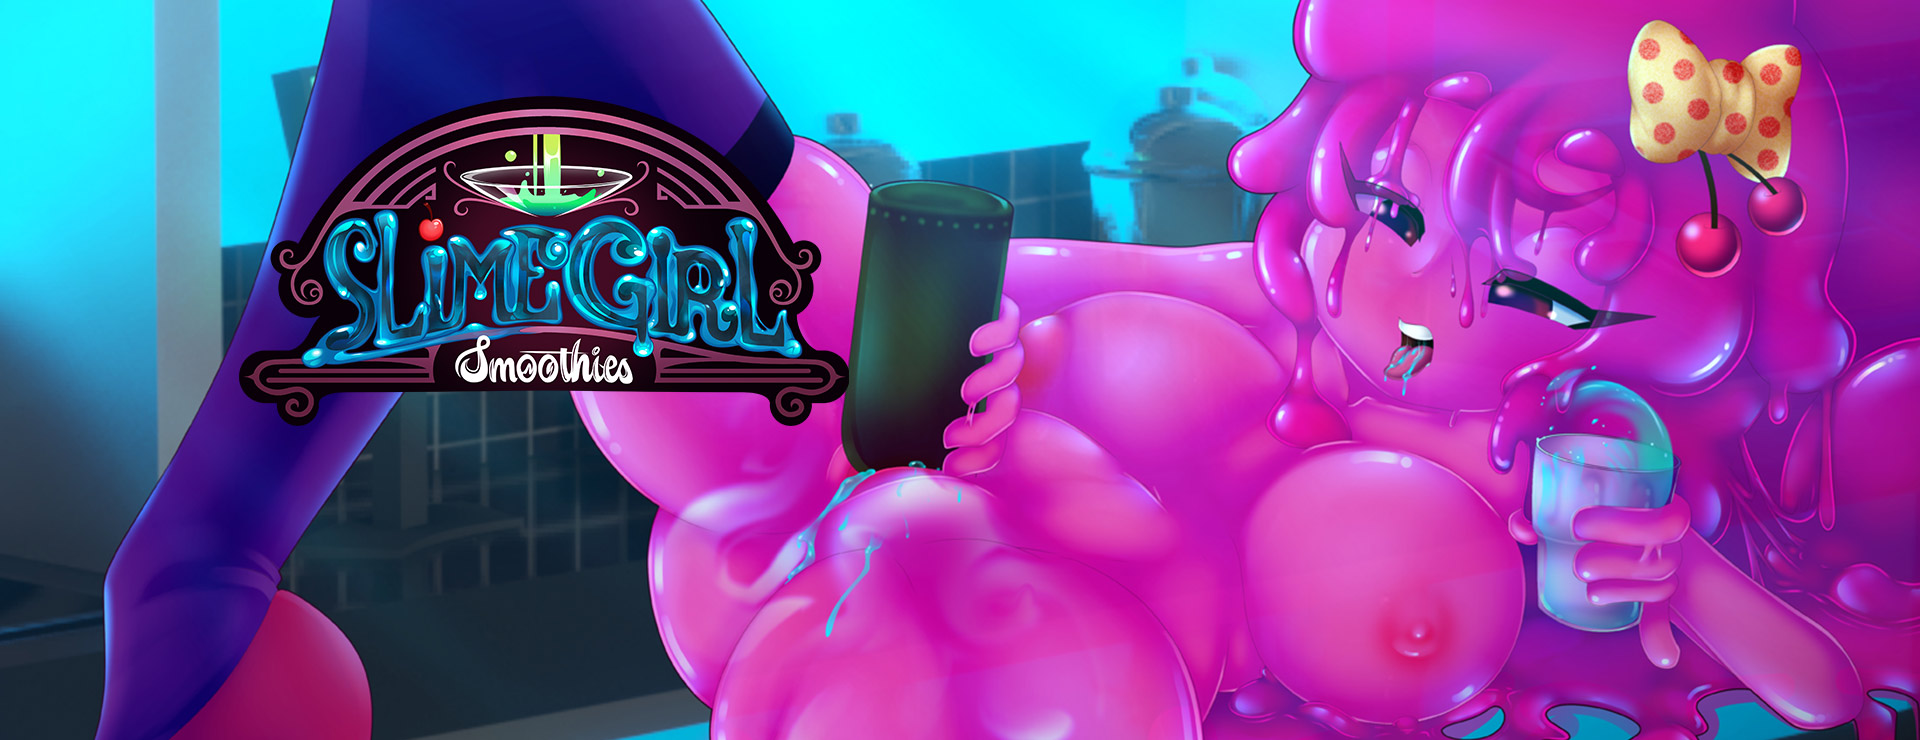 Slime Girl Smoothies - Casual Juego